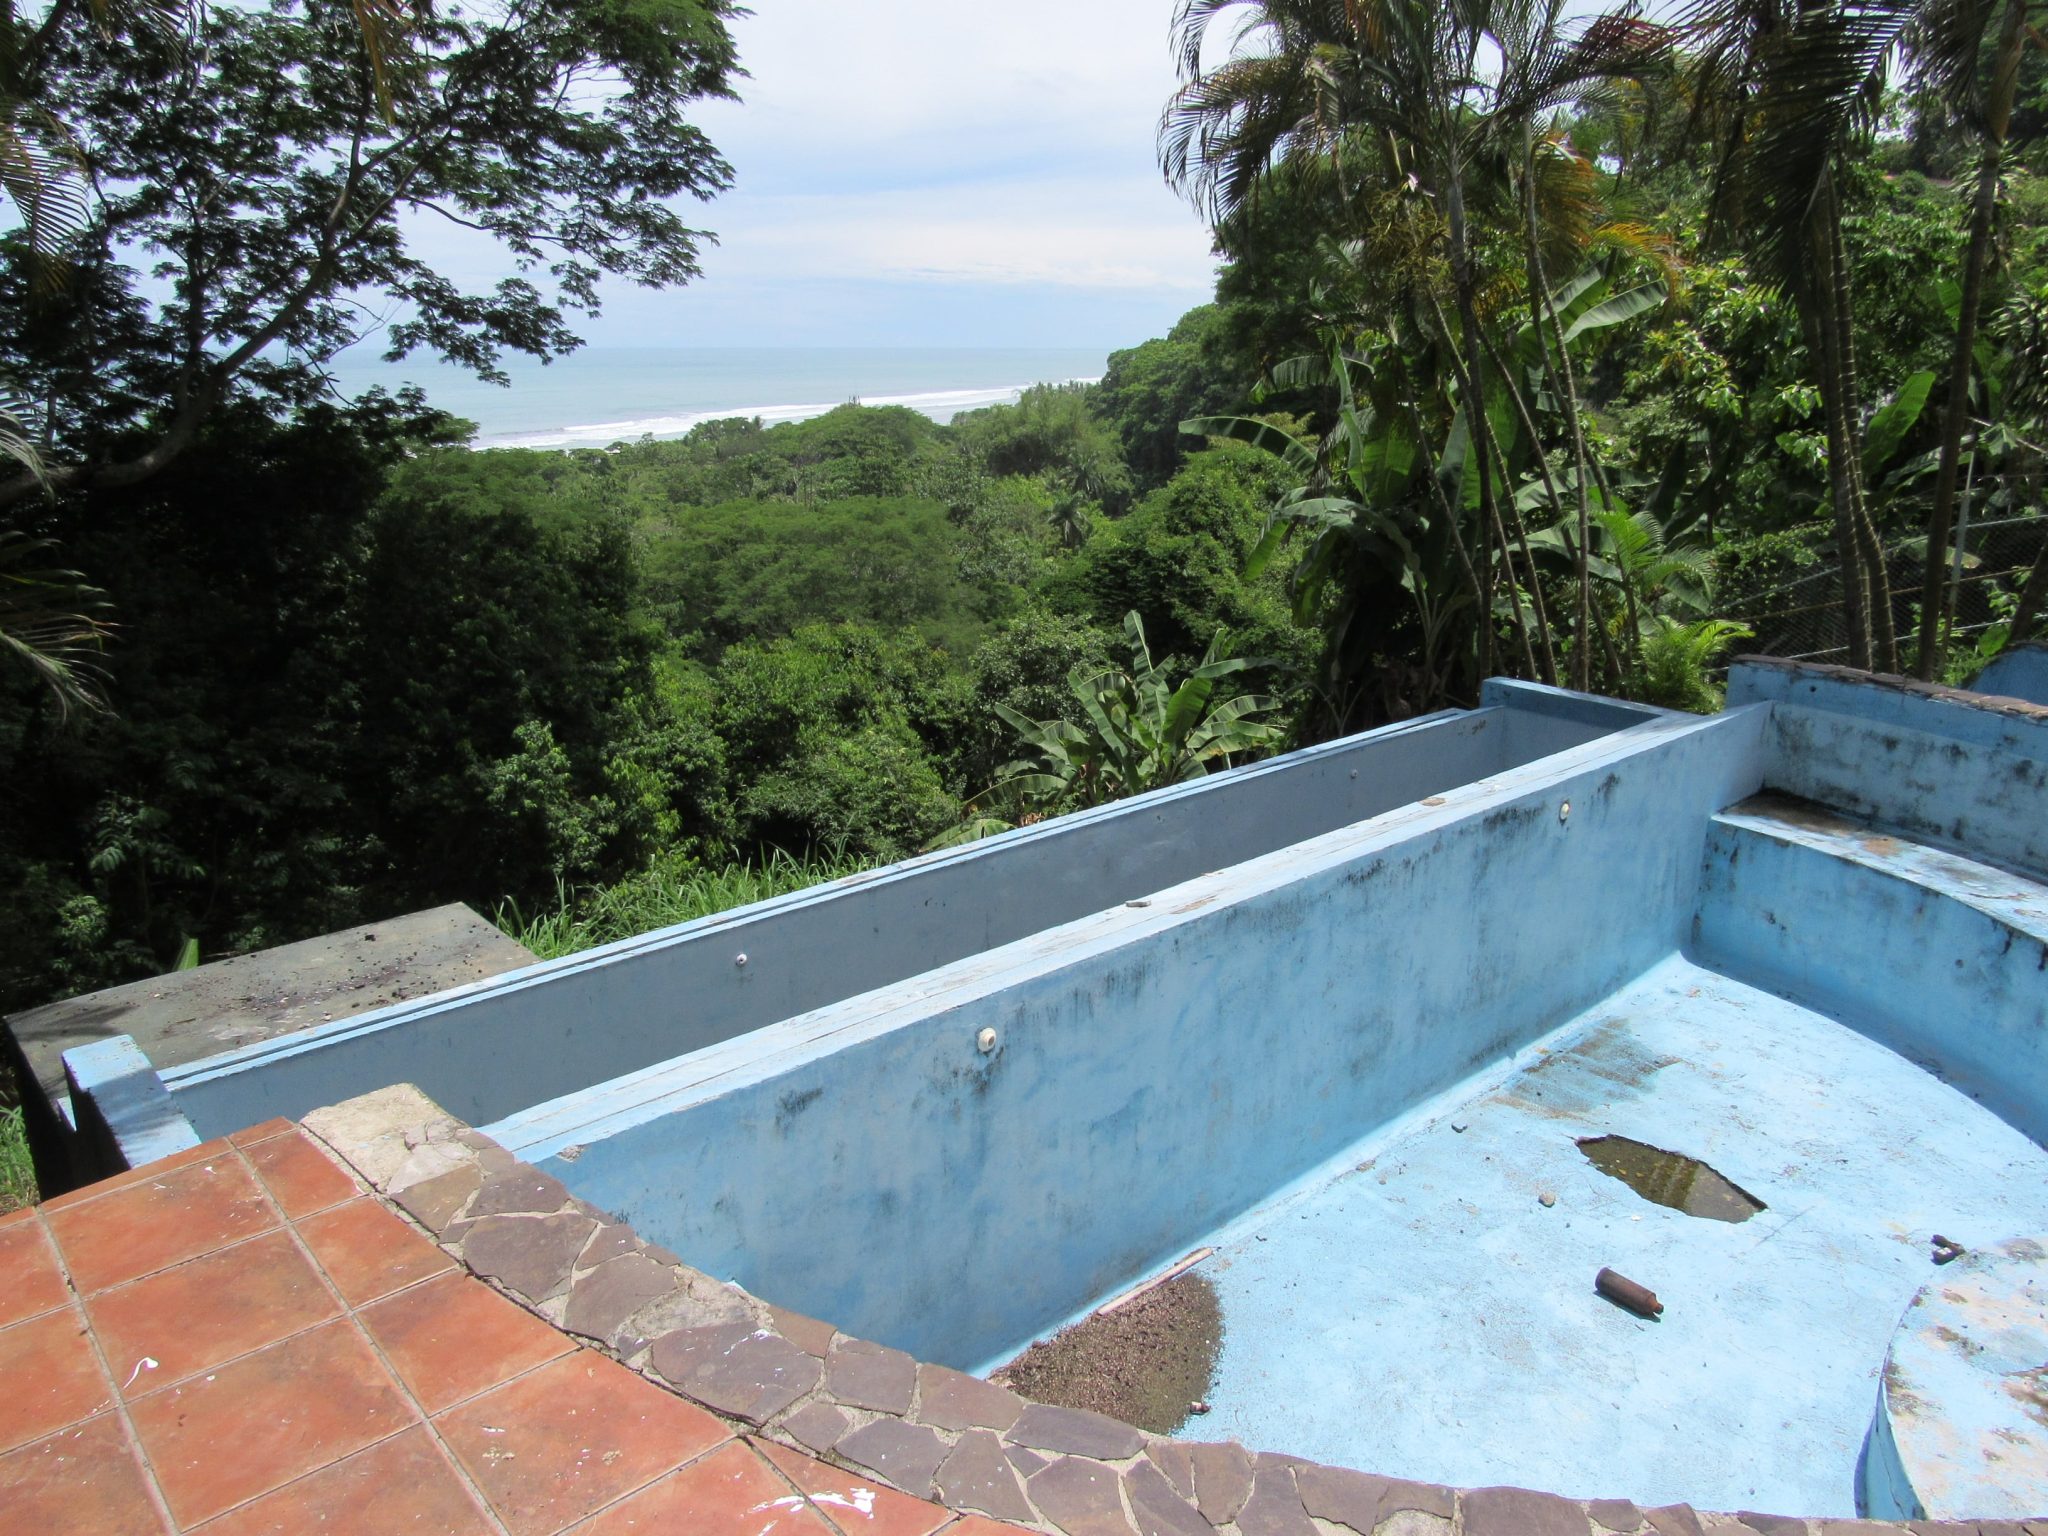 0.65 ACRES – Front Row Ocean View Home with Two Infinity Pools, Fixer Upper – Amazing Opportunity!!!